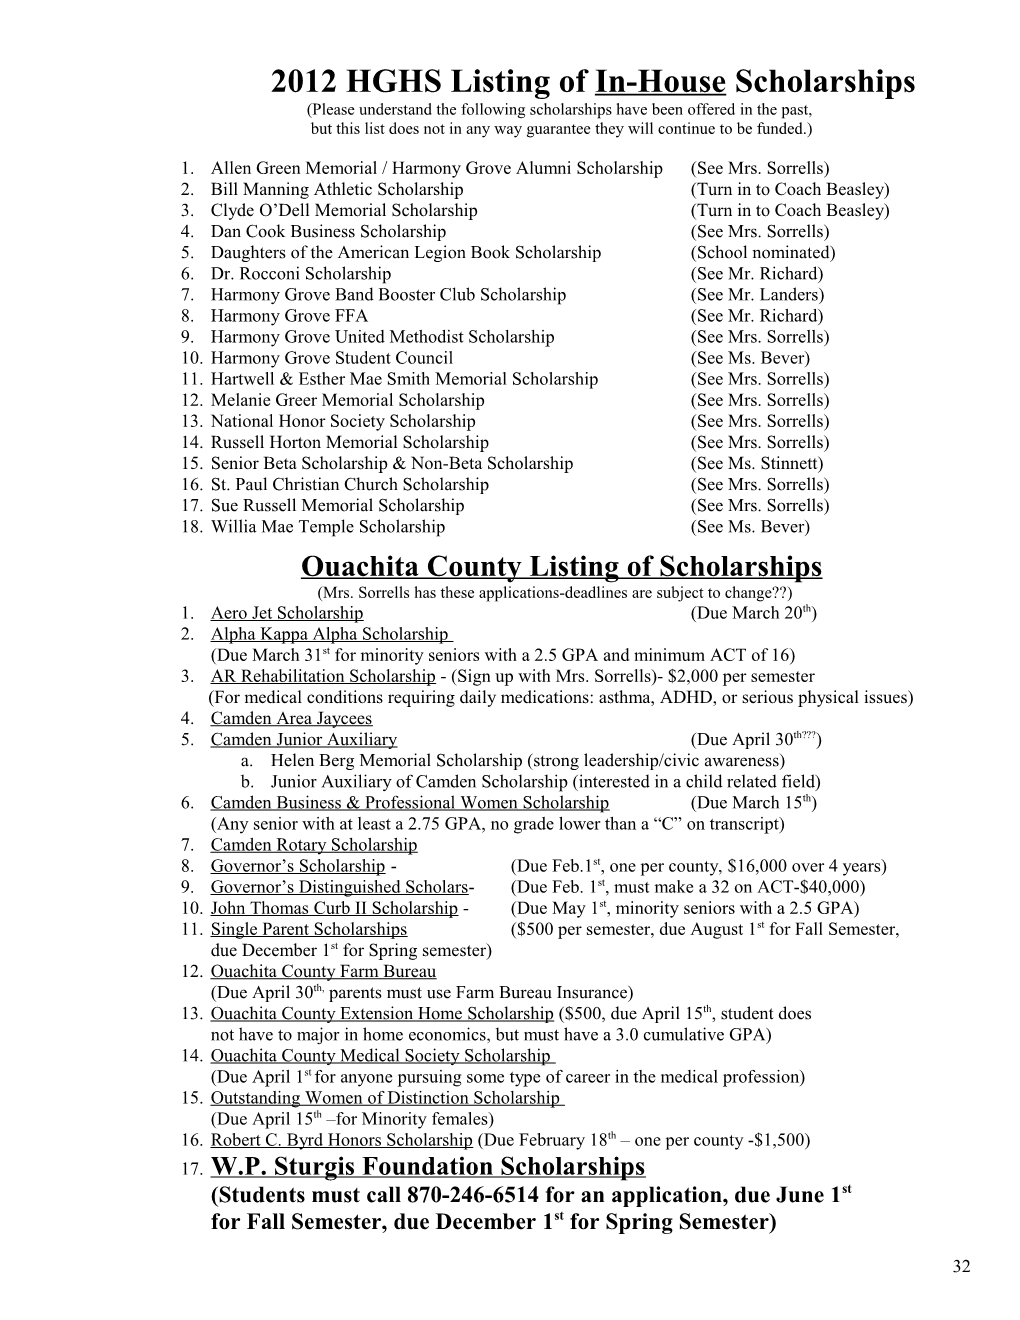 2009 HGHS Listing of In-House Scholarships